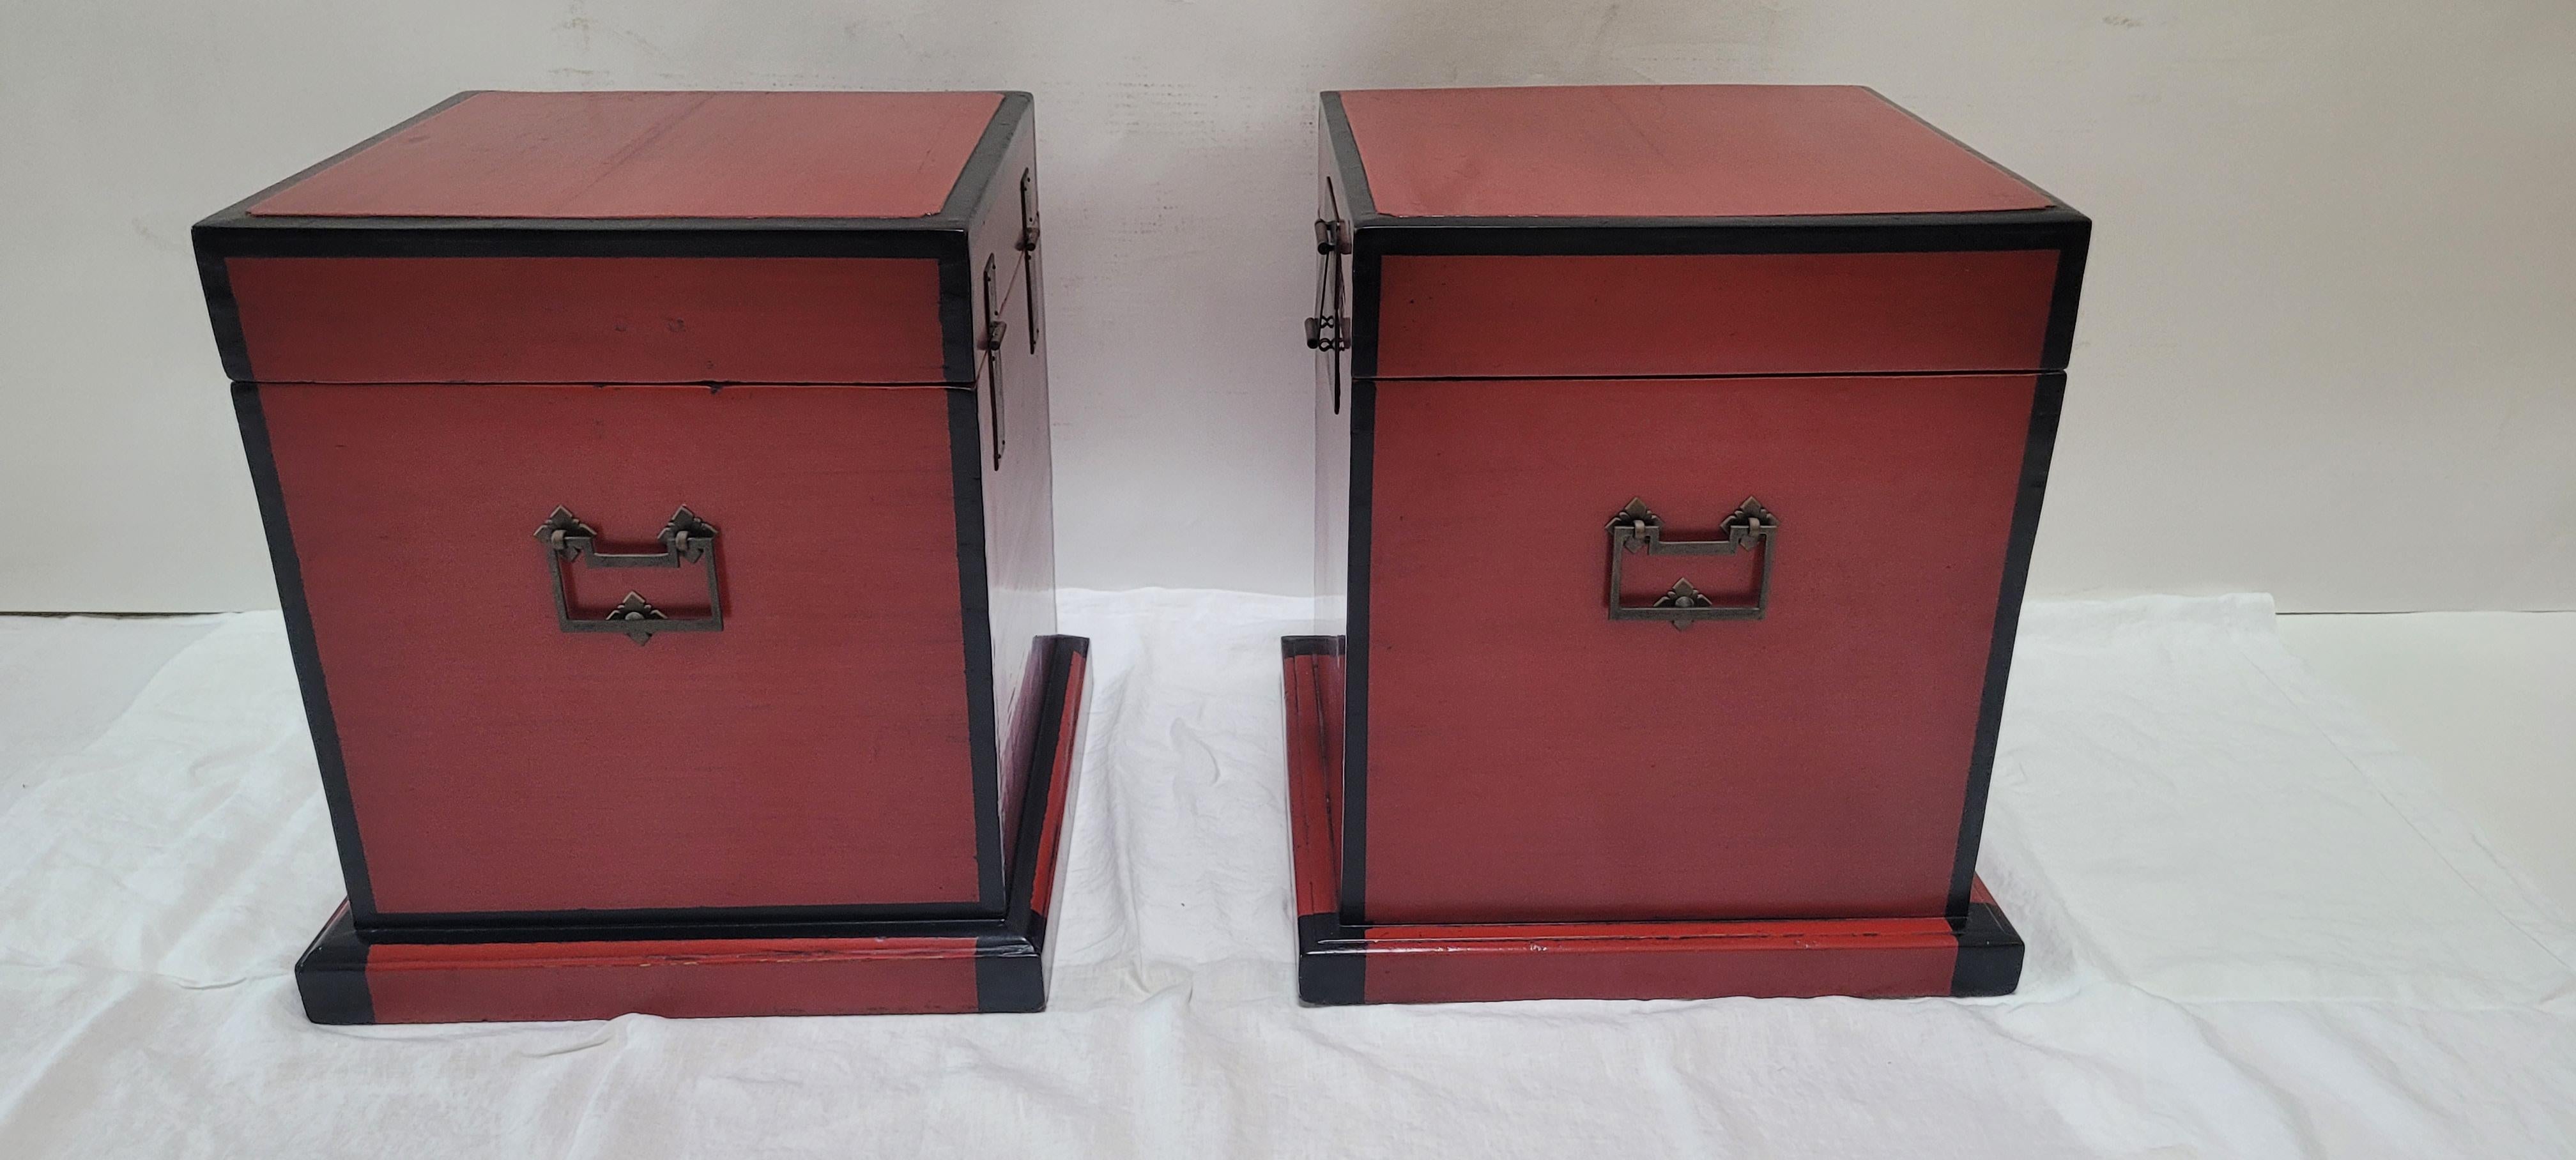 Chinese Pair of Red Lacquer Trunks - Early 20th Century For Sale